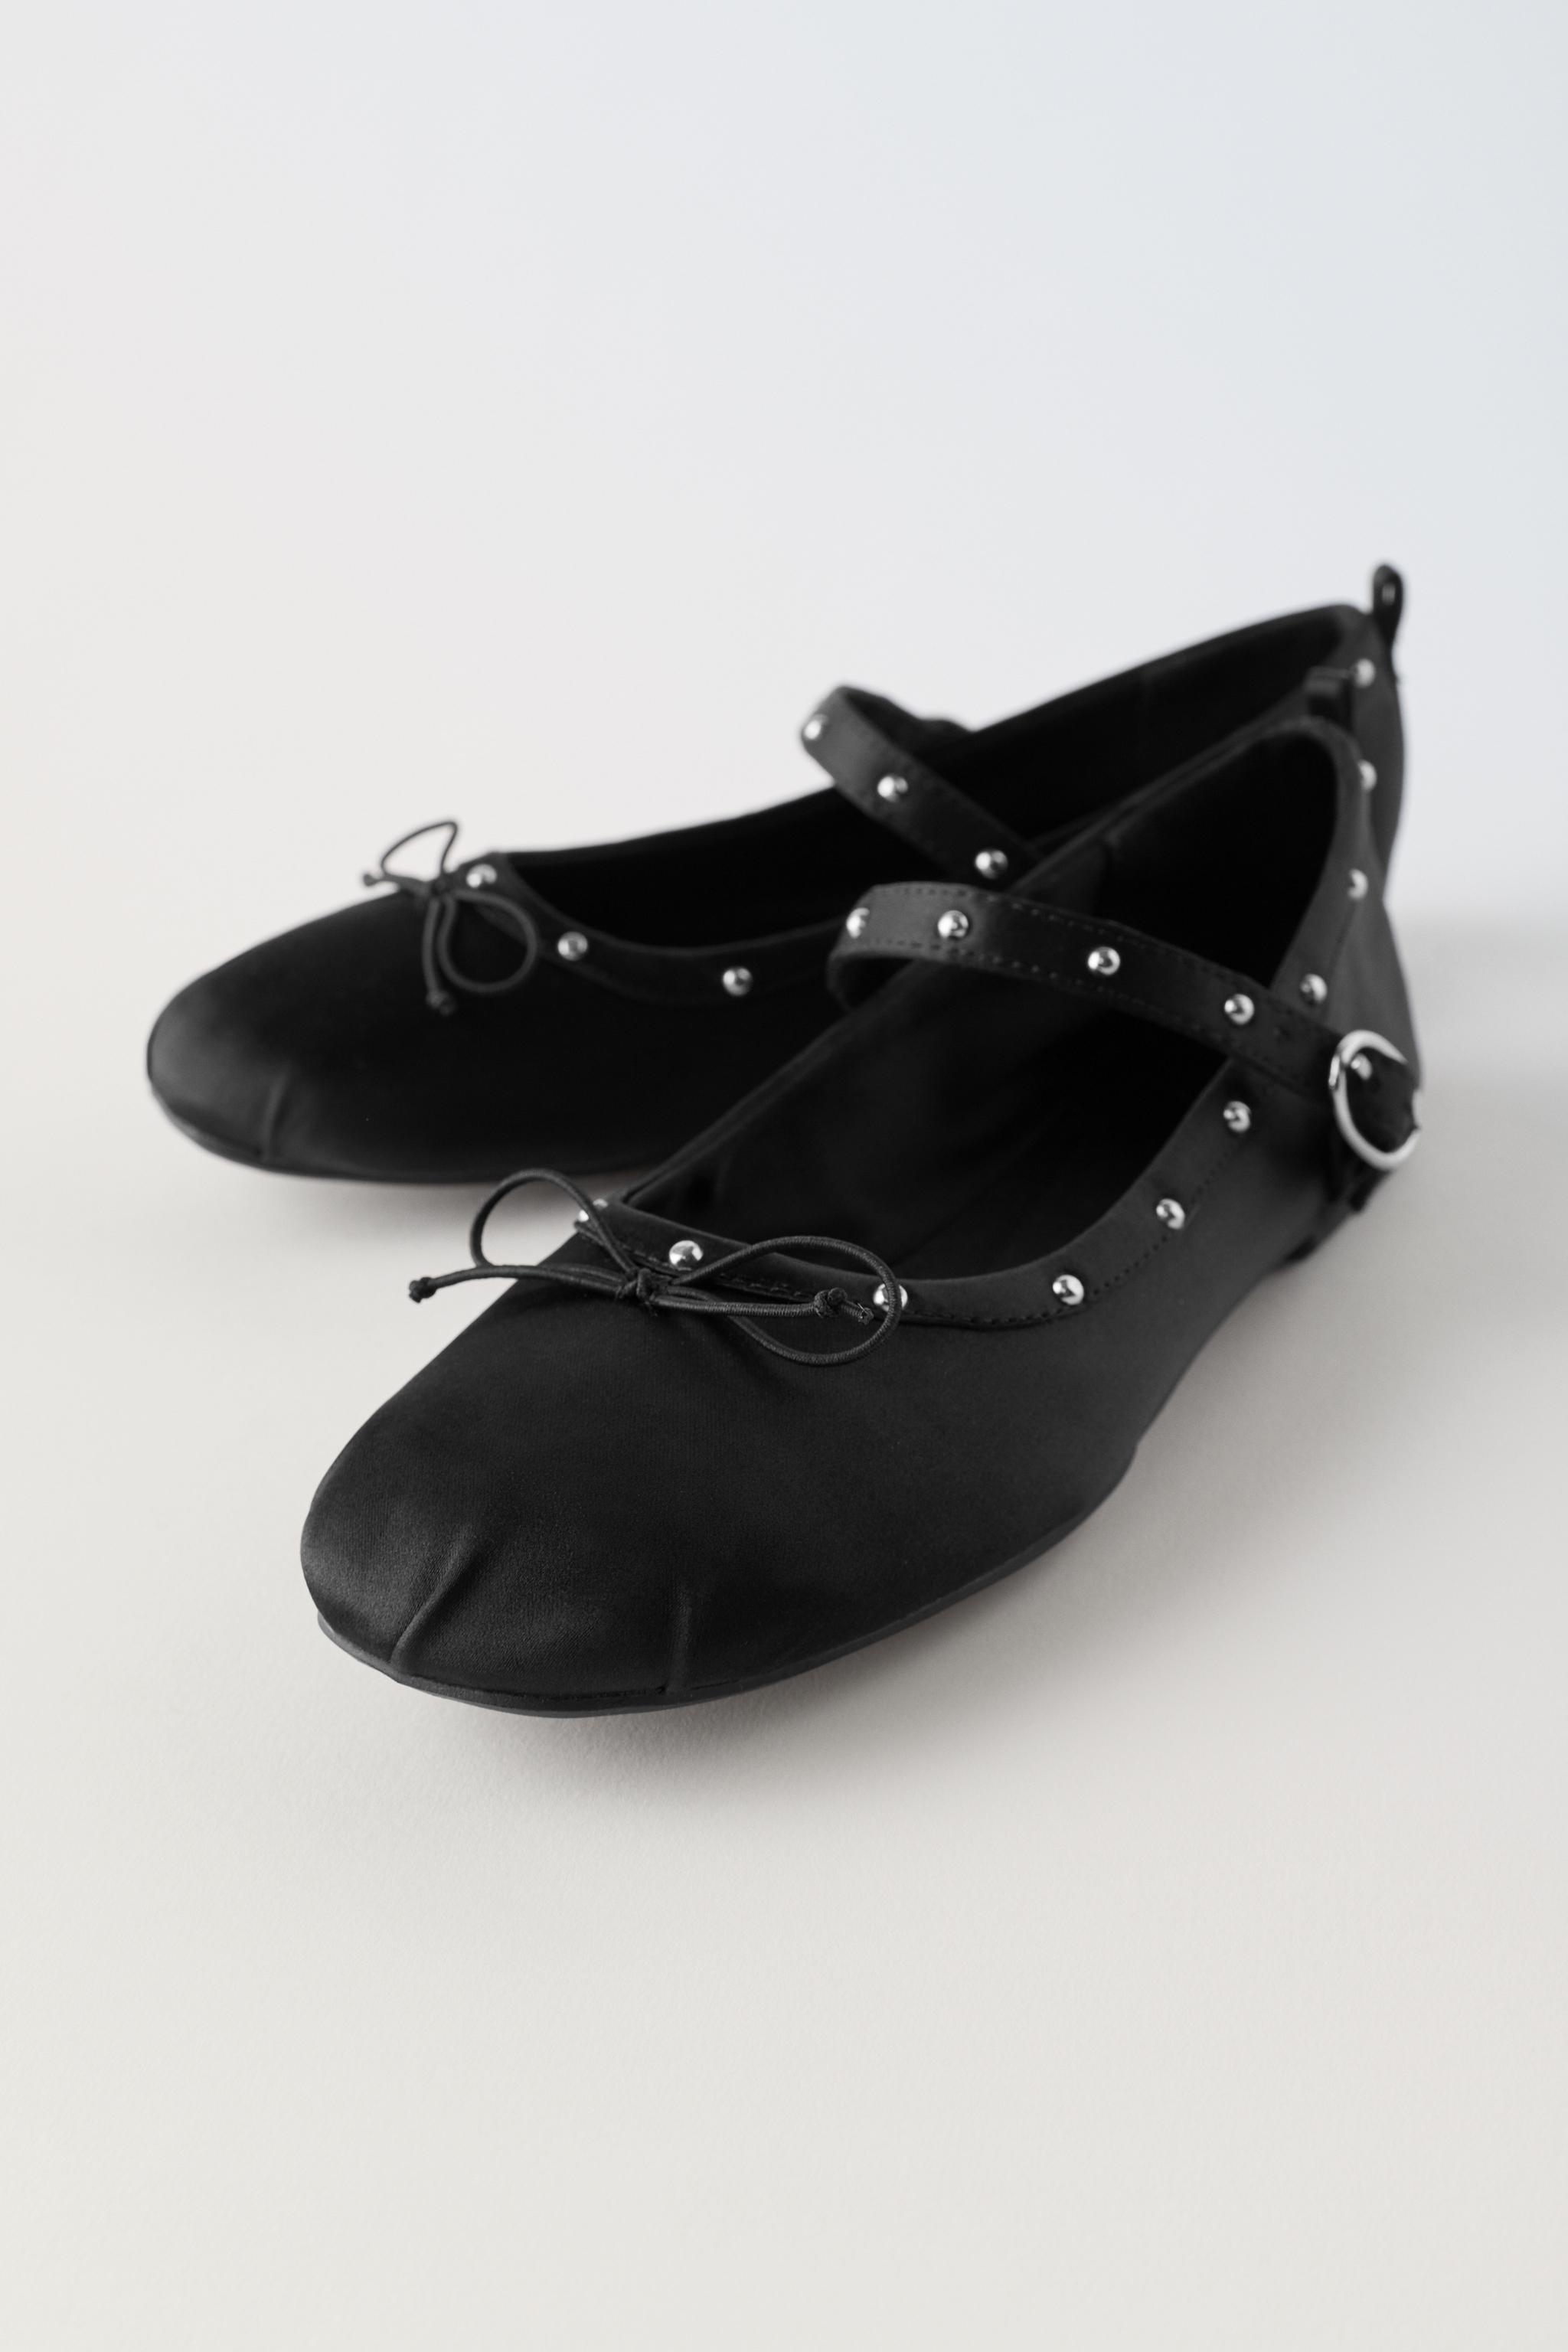 NEW ZARA LEATHER STUDDED LACE-UP BALLERINA BLACK SHOES 37 4 6.5 RARE